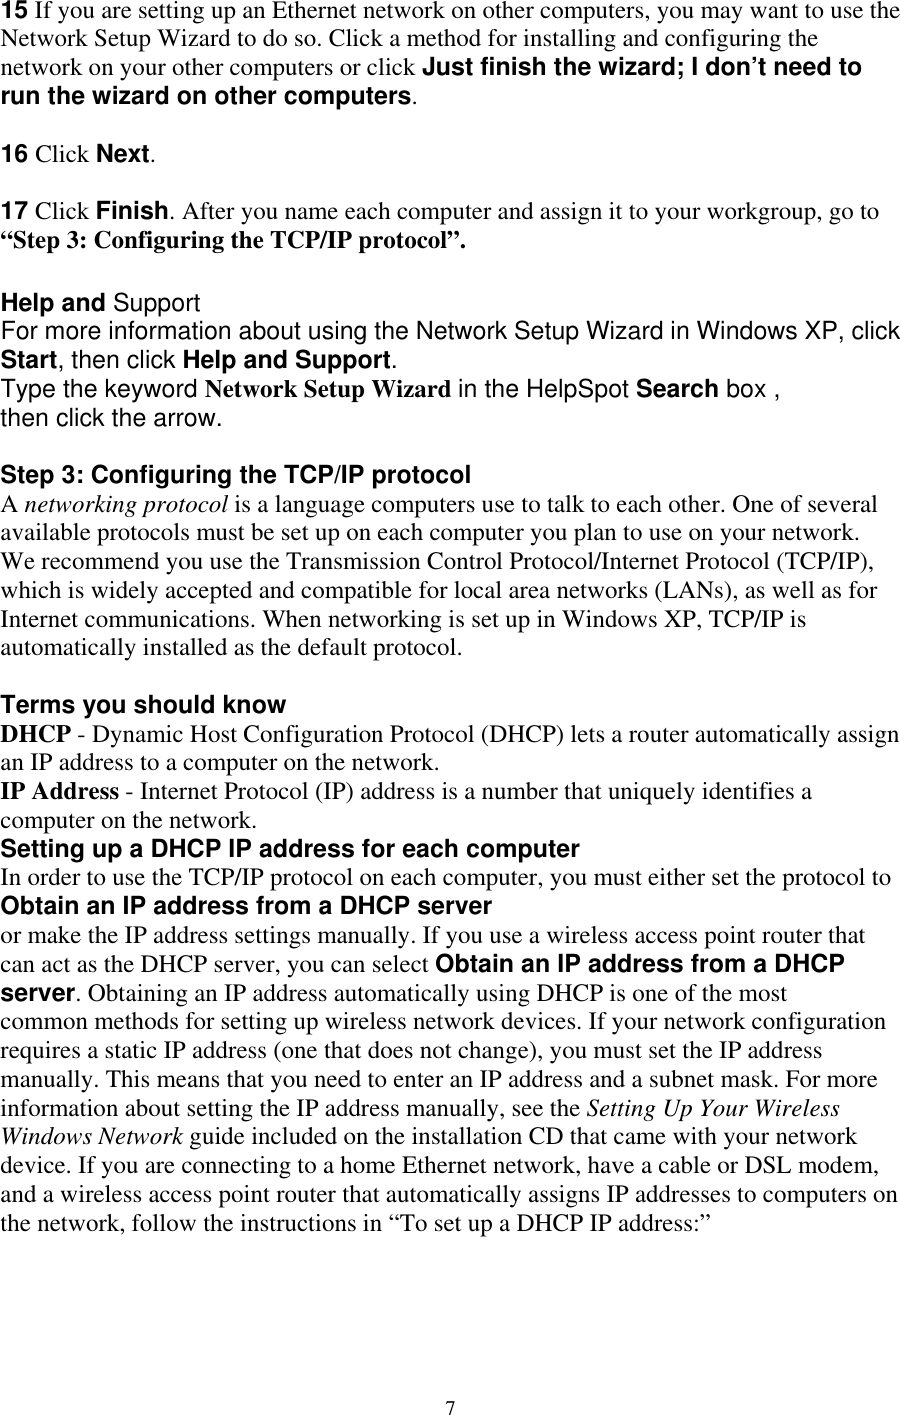 15 If you are setting up an Ethernet network on other computers, you may want to use the Network Setup Wizard to do so. Click a method for installing and configuring the network on your other computers or click Just finish the wizard; I don’t need to run the wizard on other computers.  16 Click Next.  17 Click Finish. After you name each computer and assign it to your workgroup, go to   “Step 3: Configuring the TCP/IP protocol”.  Help and Support For more information about using the Network Setup Wizard in Windows XP, click Start, then click Help and Support. Type the keyword Network Setup Wizard in the HelpSpot Search box , then click the arrow.  computer you plan to use on your network. e recommend you use the Transmission Control Protocol/Internet Protocol (TCP/IP), accepted and compatible for local area networks (LANs), as well as for ternet communications. When networking is set up in Windows XP, TCP/IP is erms you should know st Configuration Protocol (DHCP) lets a router automatically assign ss is a number that uniquely identifies a P address for each computer  order to use the TCP/IP protocol on each computer, you must either set the protocol to r      IP address and a subnet mask. For more formation about setting the IP address manually, see the Setting Up Your Wireless ded on the installation CD that came with your network tically assigns IP addresses to computers on  Step 3: Configuring the TCP/IP protocol A networking protocol is a language computers use to talk to each other. One of severalavailable protocols must be set up on each Wwhich is widely Inautomatically installed as the default protocol.  TDHCP - Dynamic Hoan IP address to a computer on the network. IP Address - Internet Protocol (IP) addrecomputer on the network. Setting up a DHCP IInObtain an IP address from a DHCP serveor make the IP address settings manually. If you use a wireless access point router that can act as the DHCP server, you can select Obtain an IP address from a DHCP server. Obtaining an IP address automatically using DHCP is one of the most common methods for setting up wireless network devices. If your network configurationrequires a static IP address (one that does not change), you must set the IP addressmanually. This means that you need to enter aninWindows Network guide includevice. If you are connecting to a home Ethernet network, have a cable or DSL modem, and a wireless access point router that automathe network, follow the instructions in “To set up a DHCP IP address:”       7